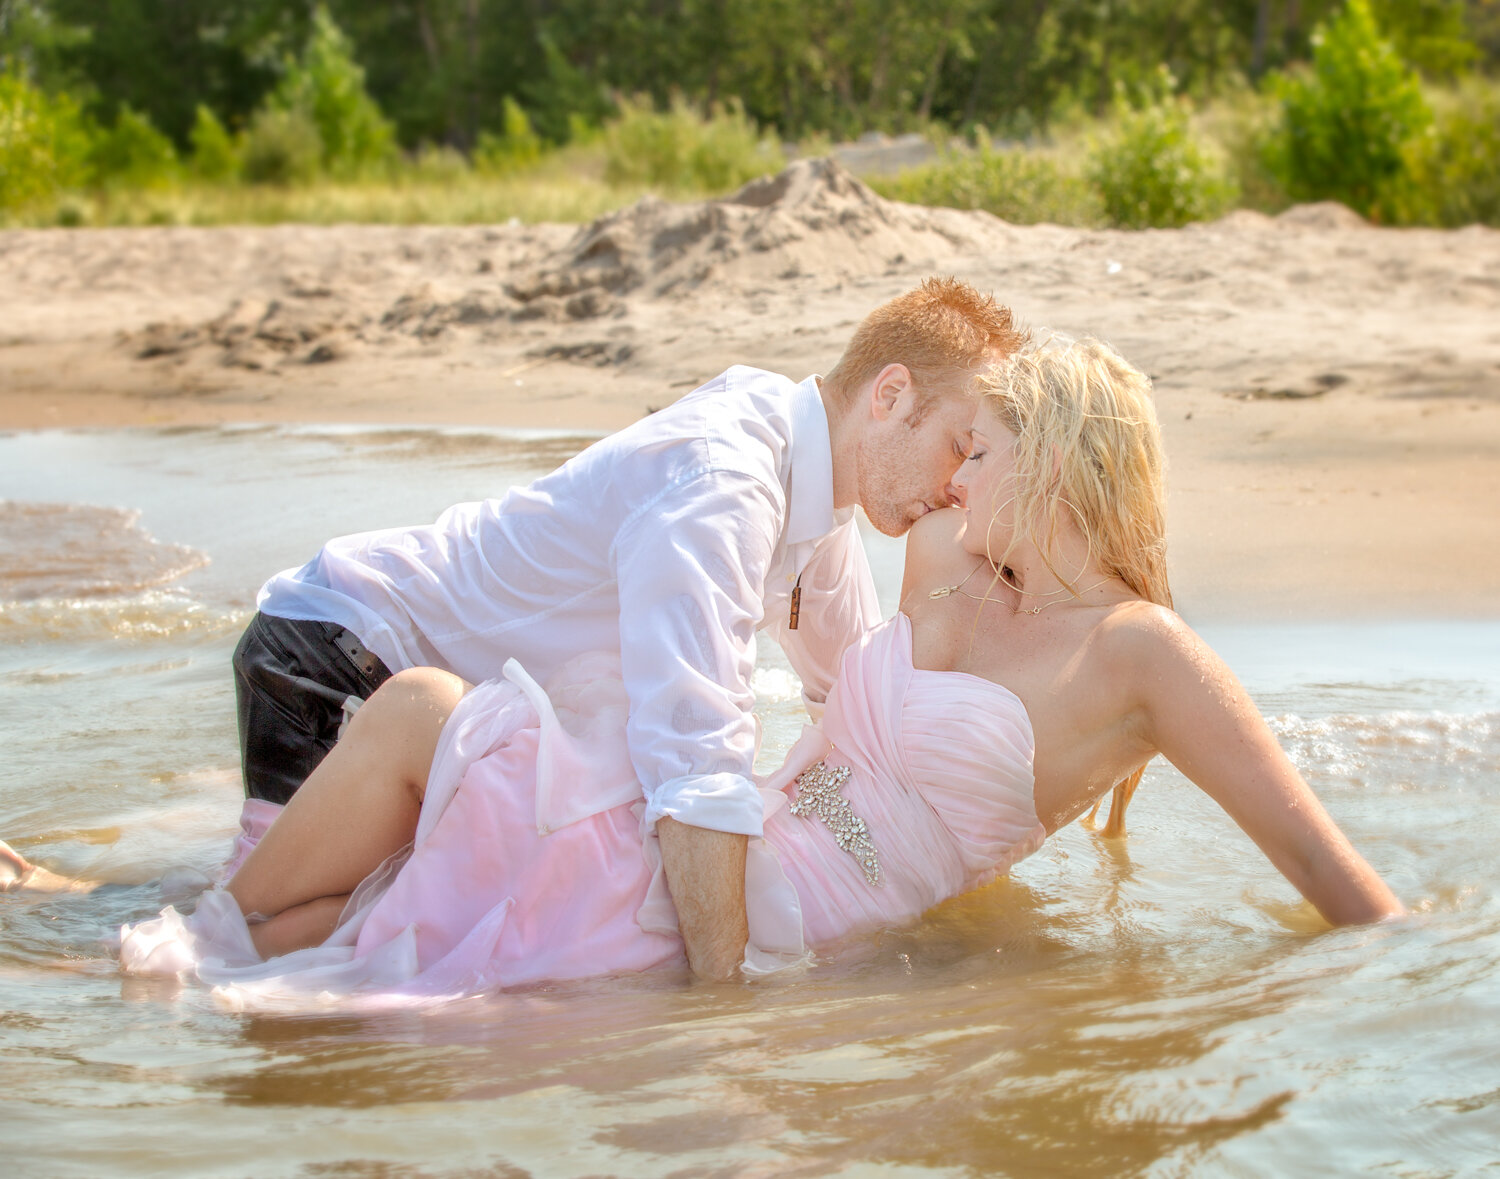 07-love-story-engagement-and-couples-photography-elopement-wedding-pictures-midland-georgian-bay-beeton-studio-outdoor-photos-trash-the-dress-fashion.jpg